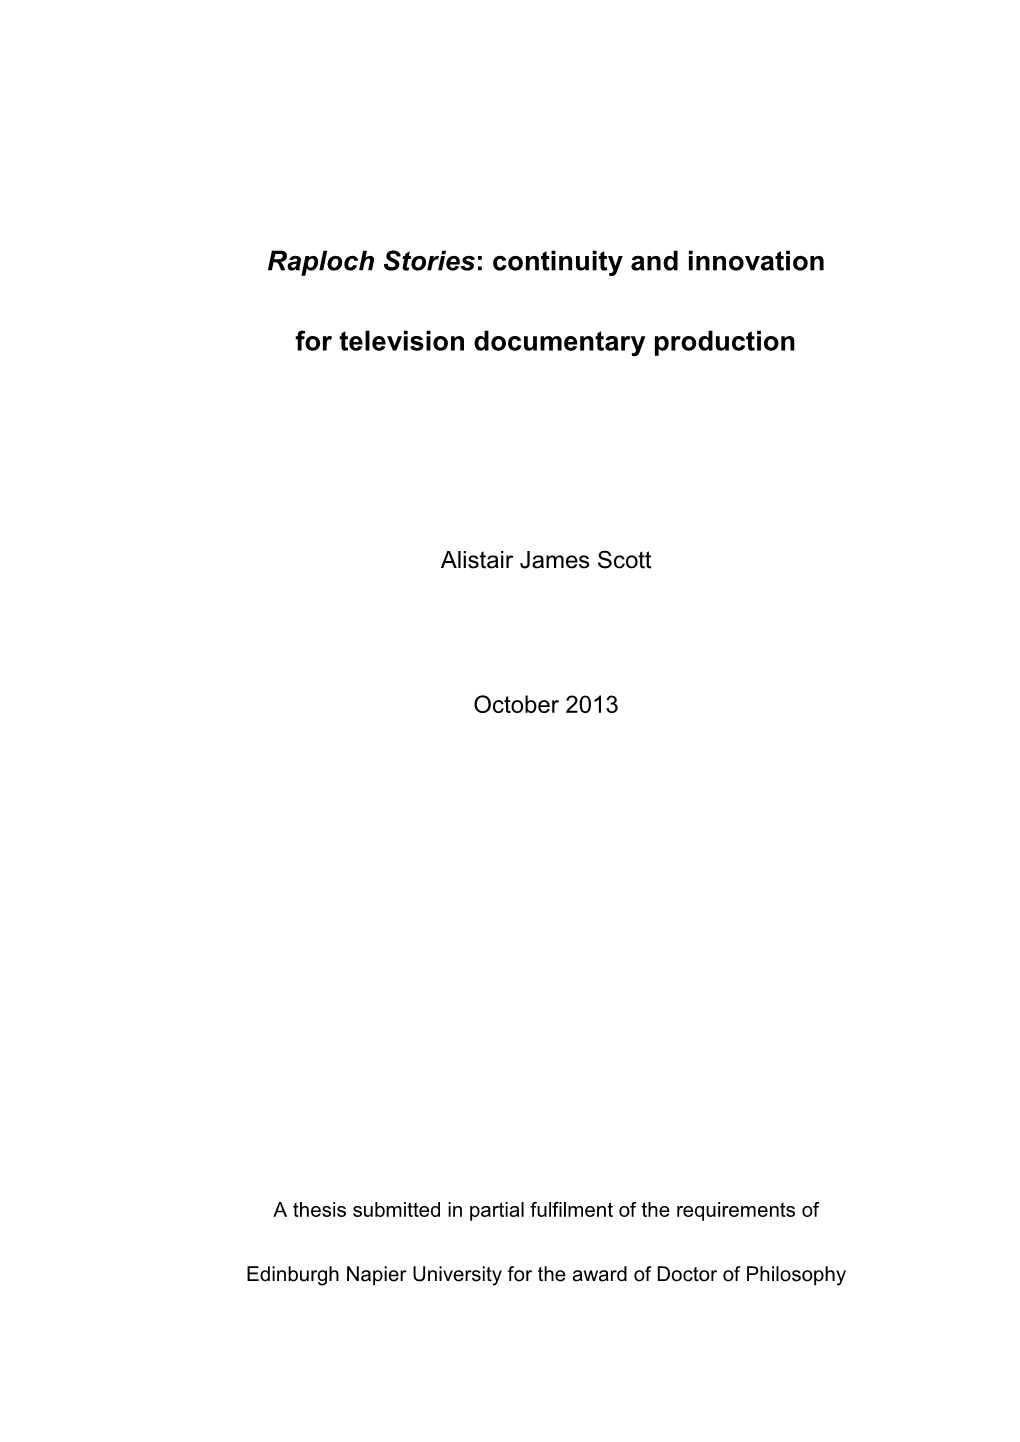 Raploch Stories: Continuity and Innovation for Television